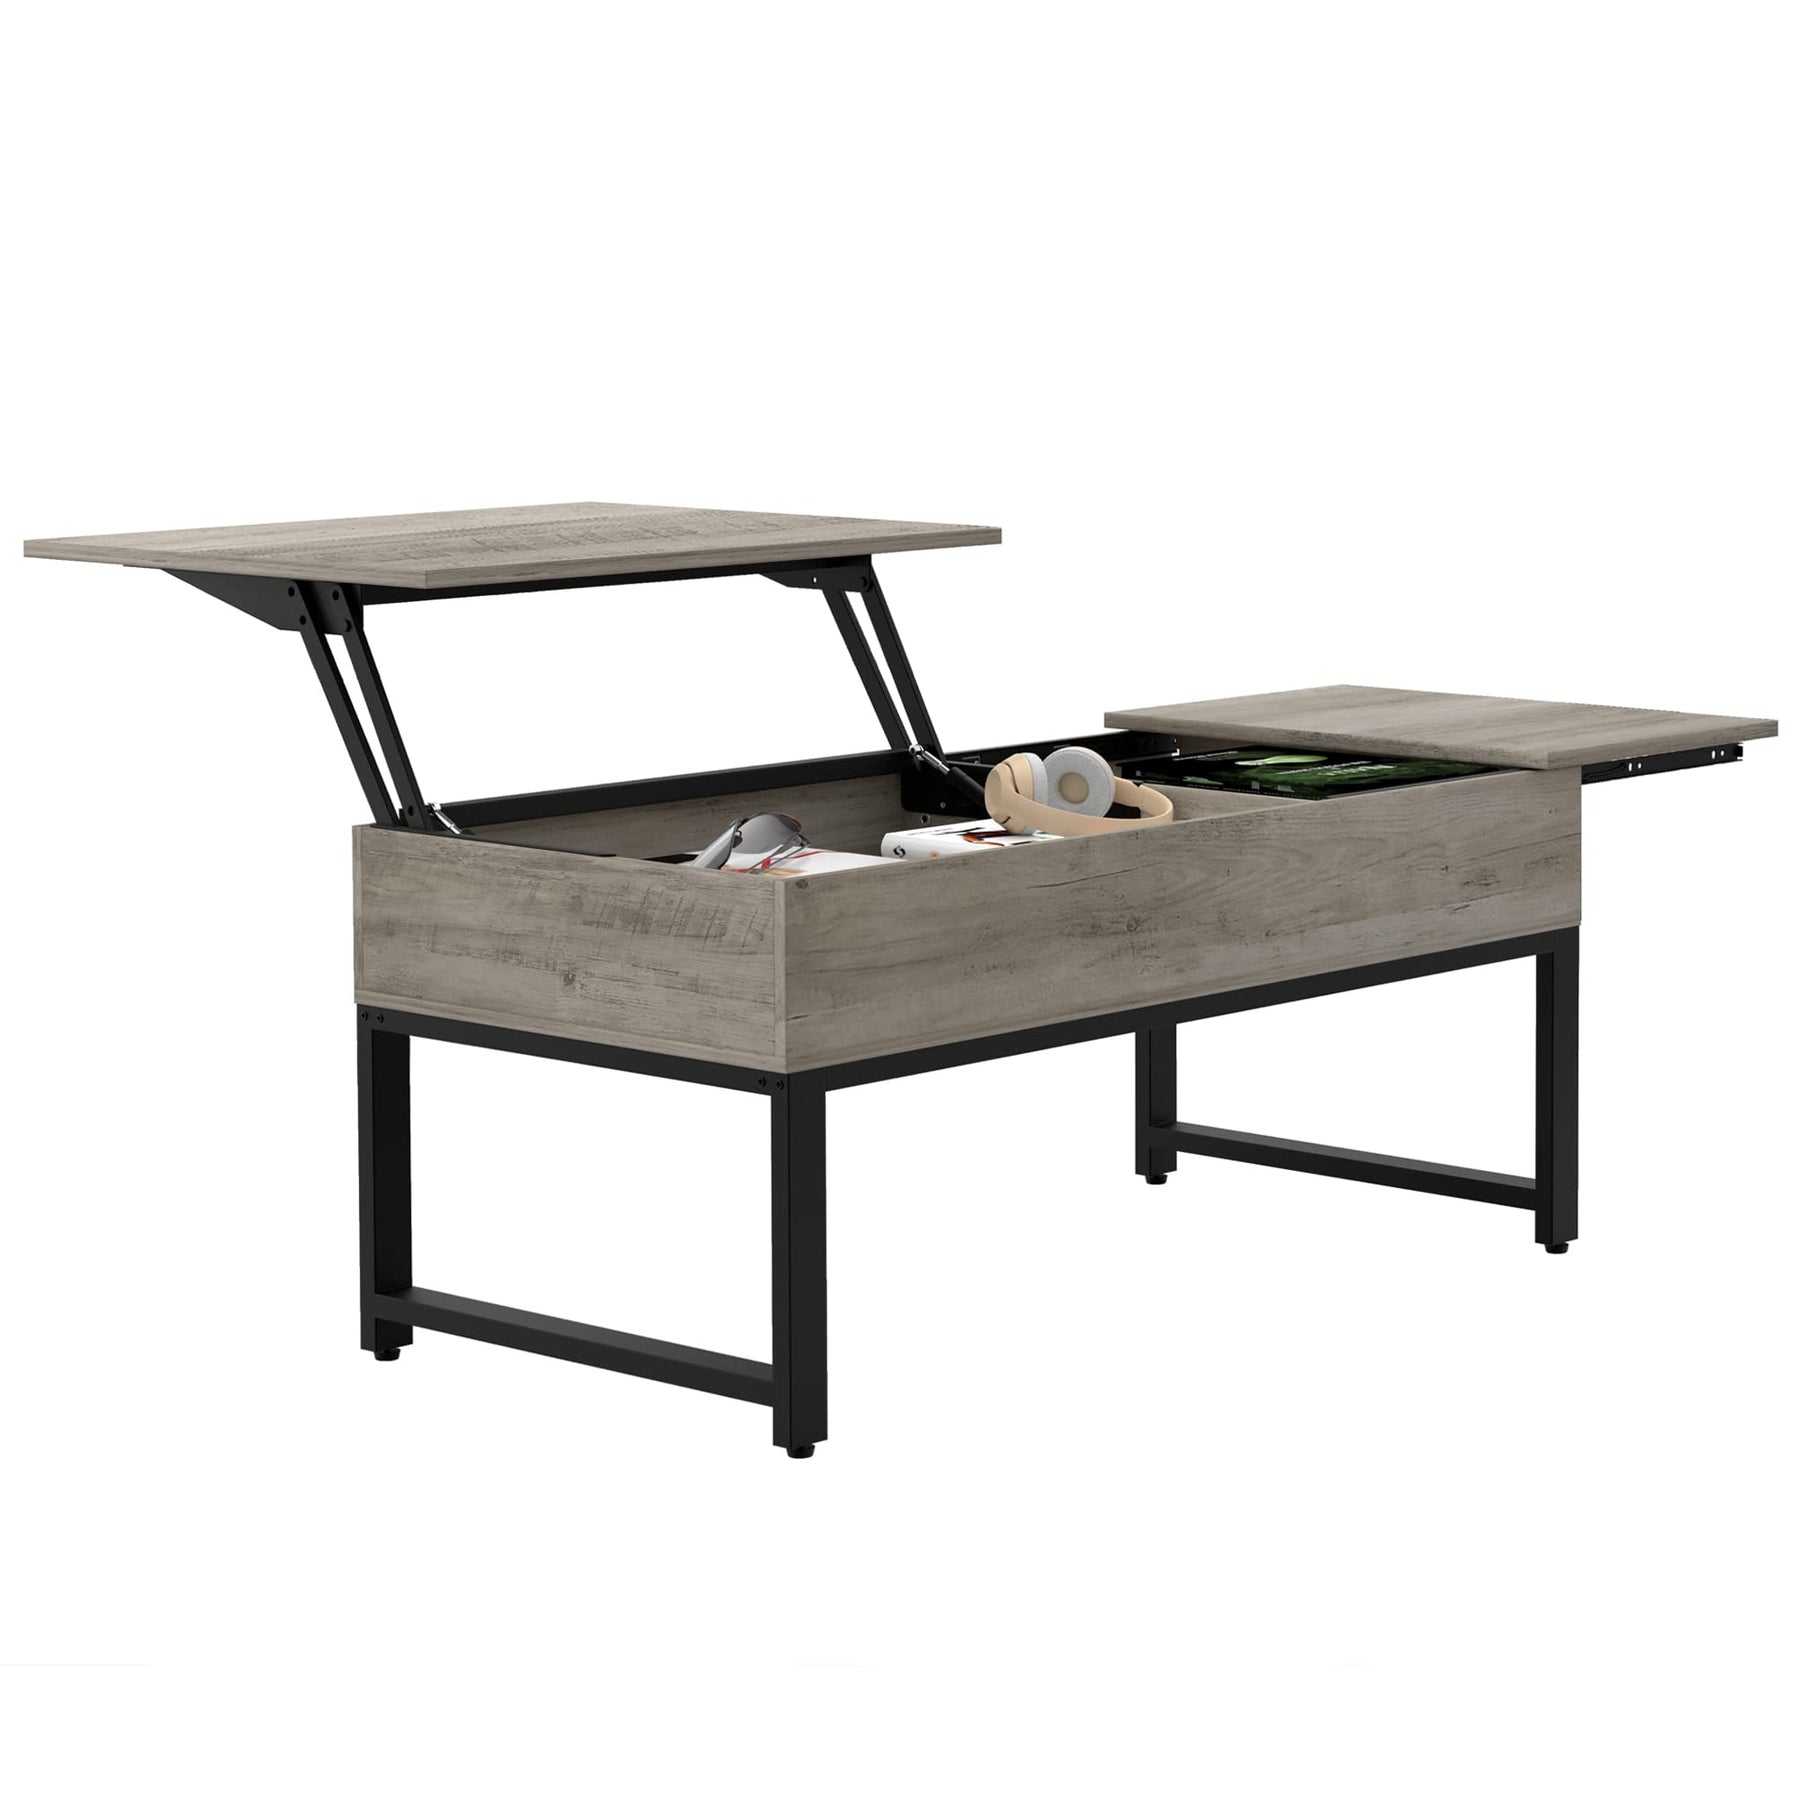 IDEALHOUSE Lift Top Coffee Table with Hidden Storage - Black